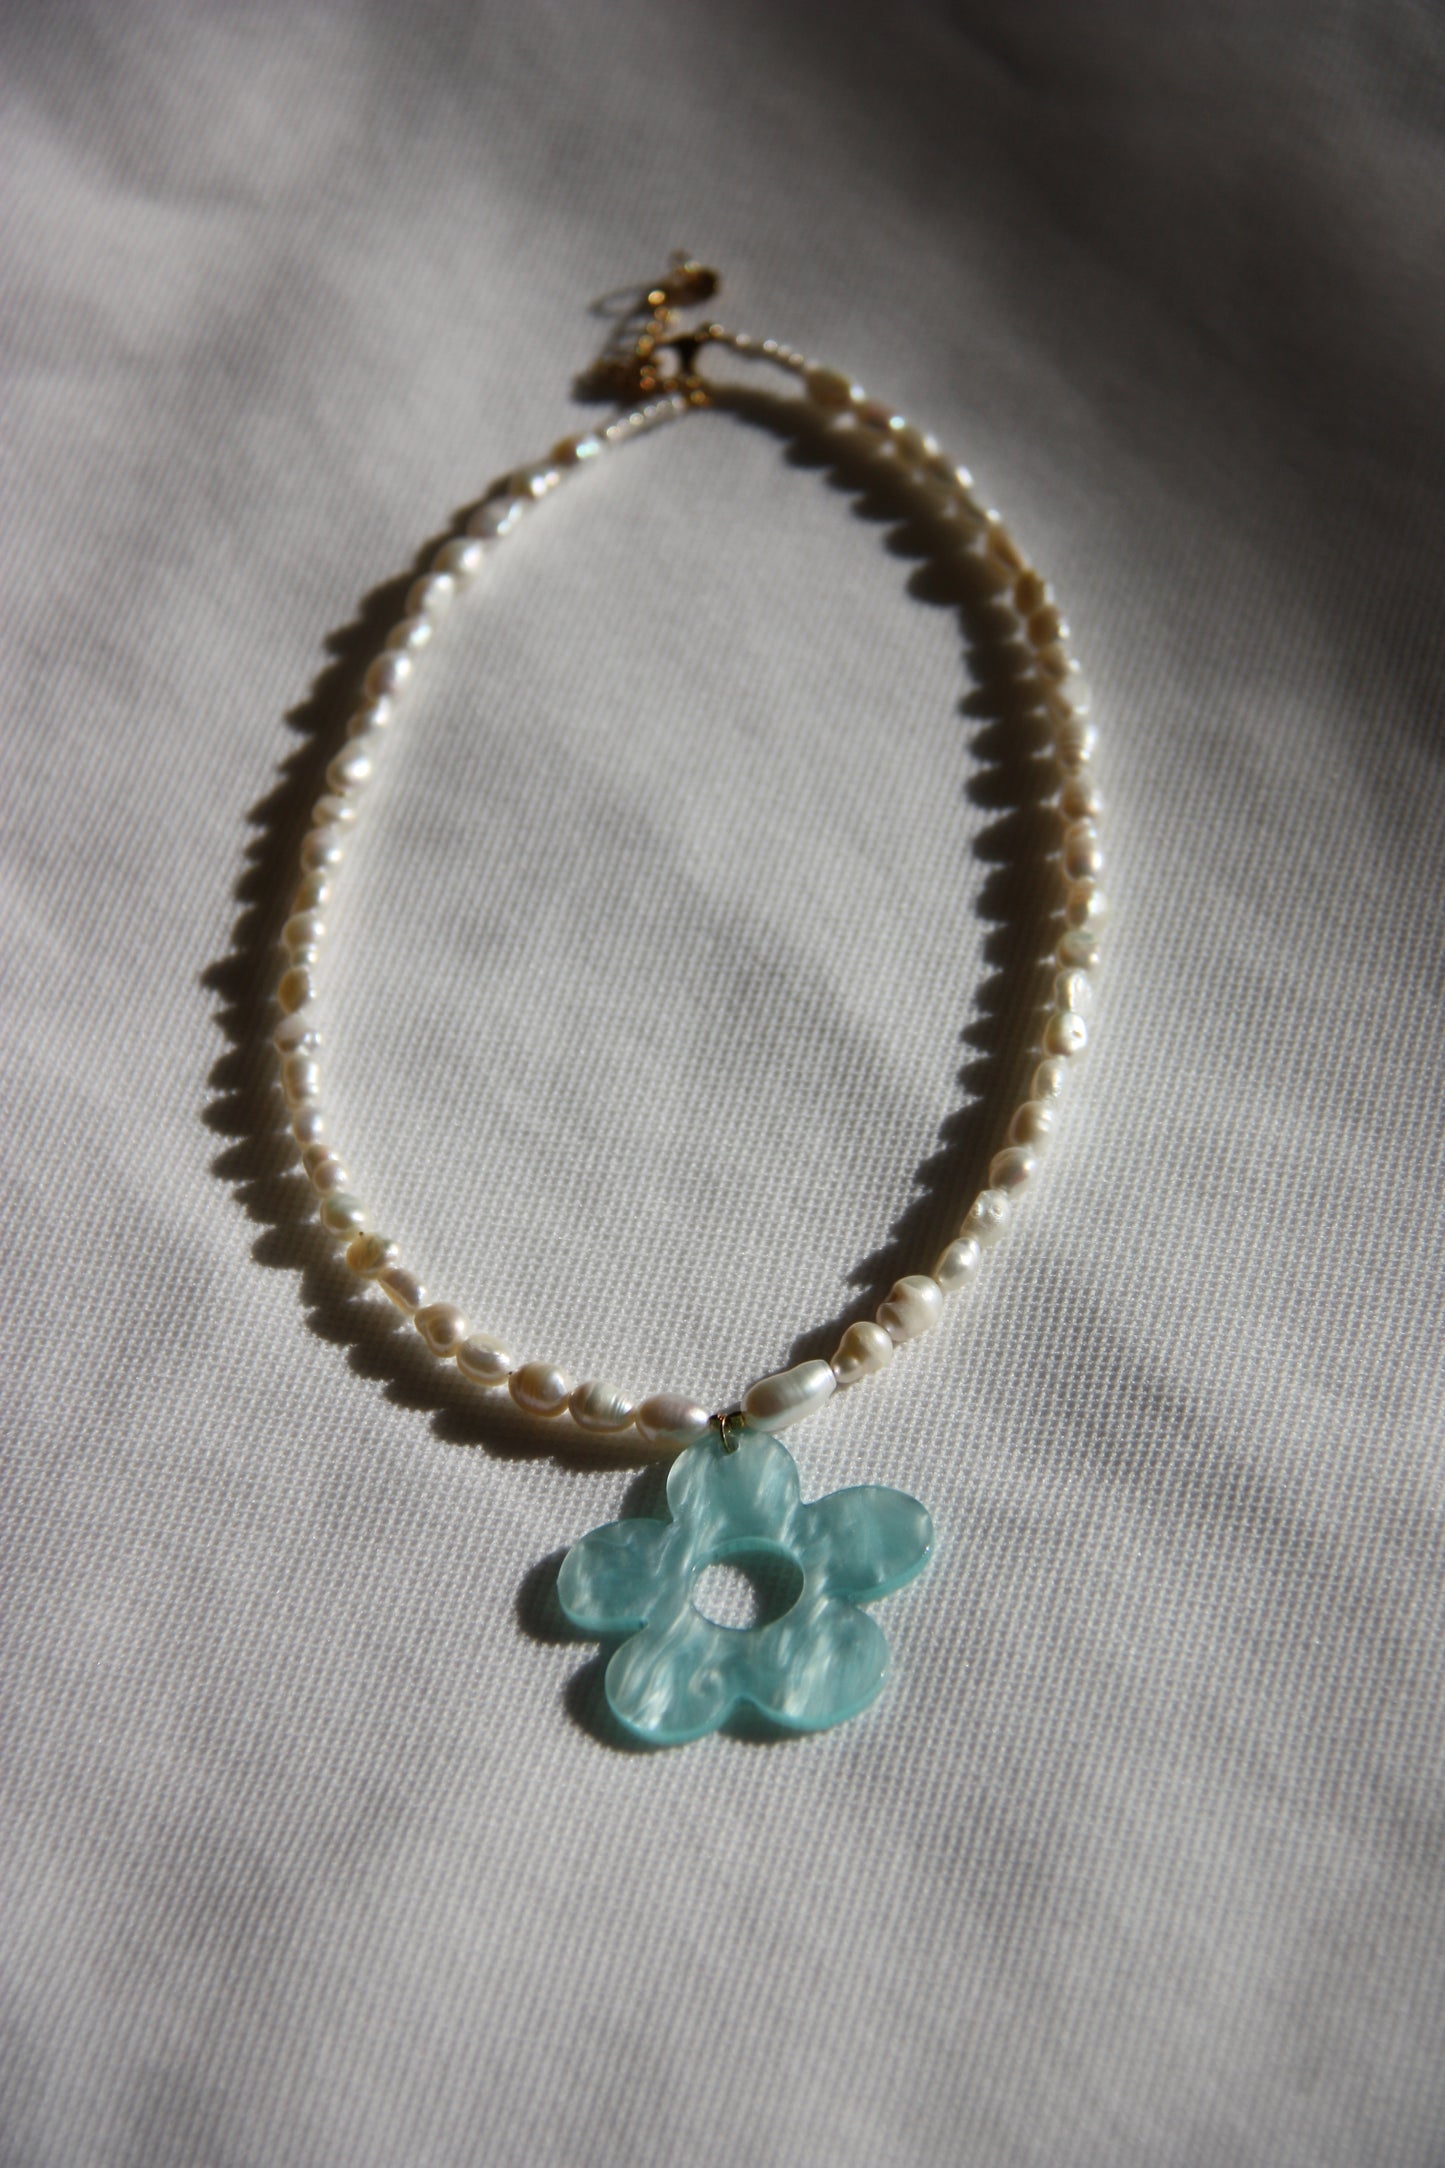 Funky flower necklace